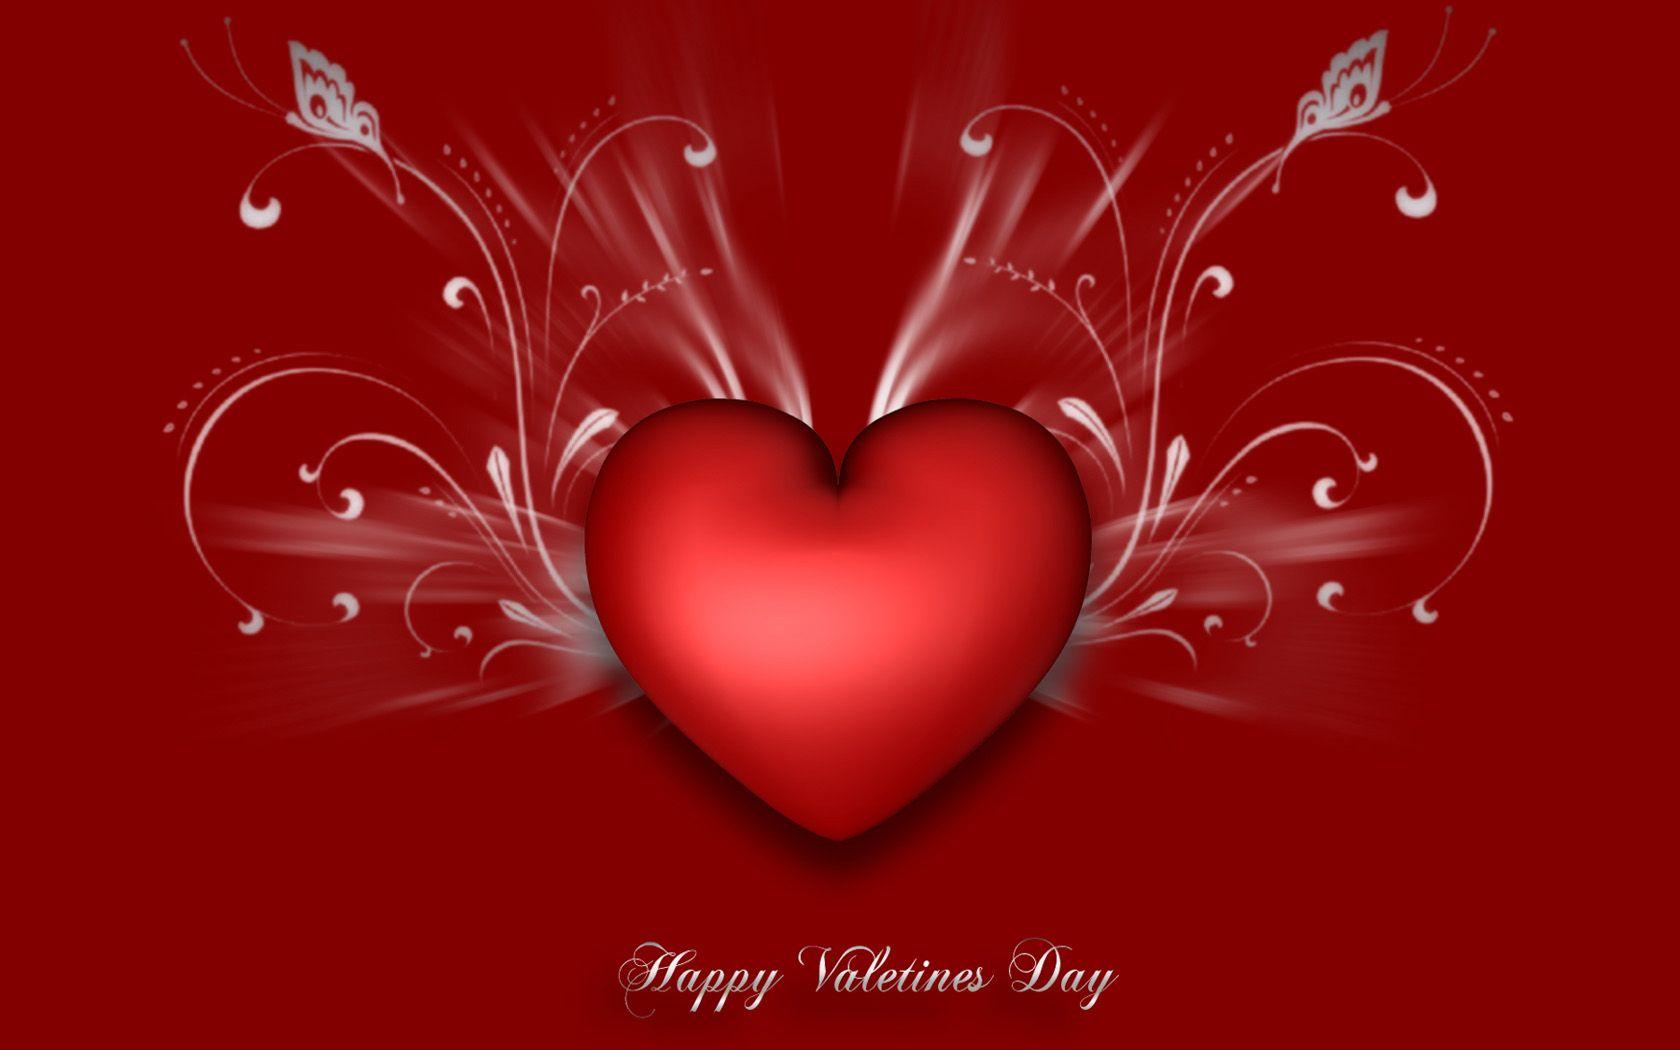 Valentine Day Picture Message. Home Concepts Ideas